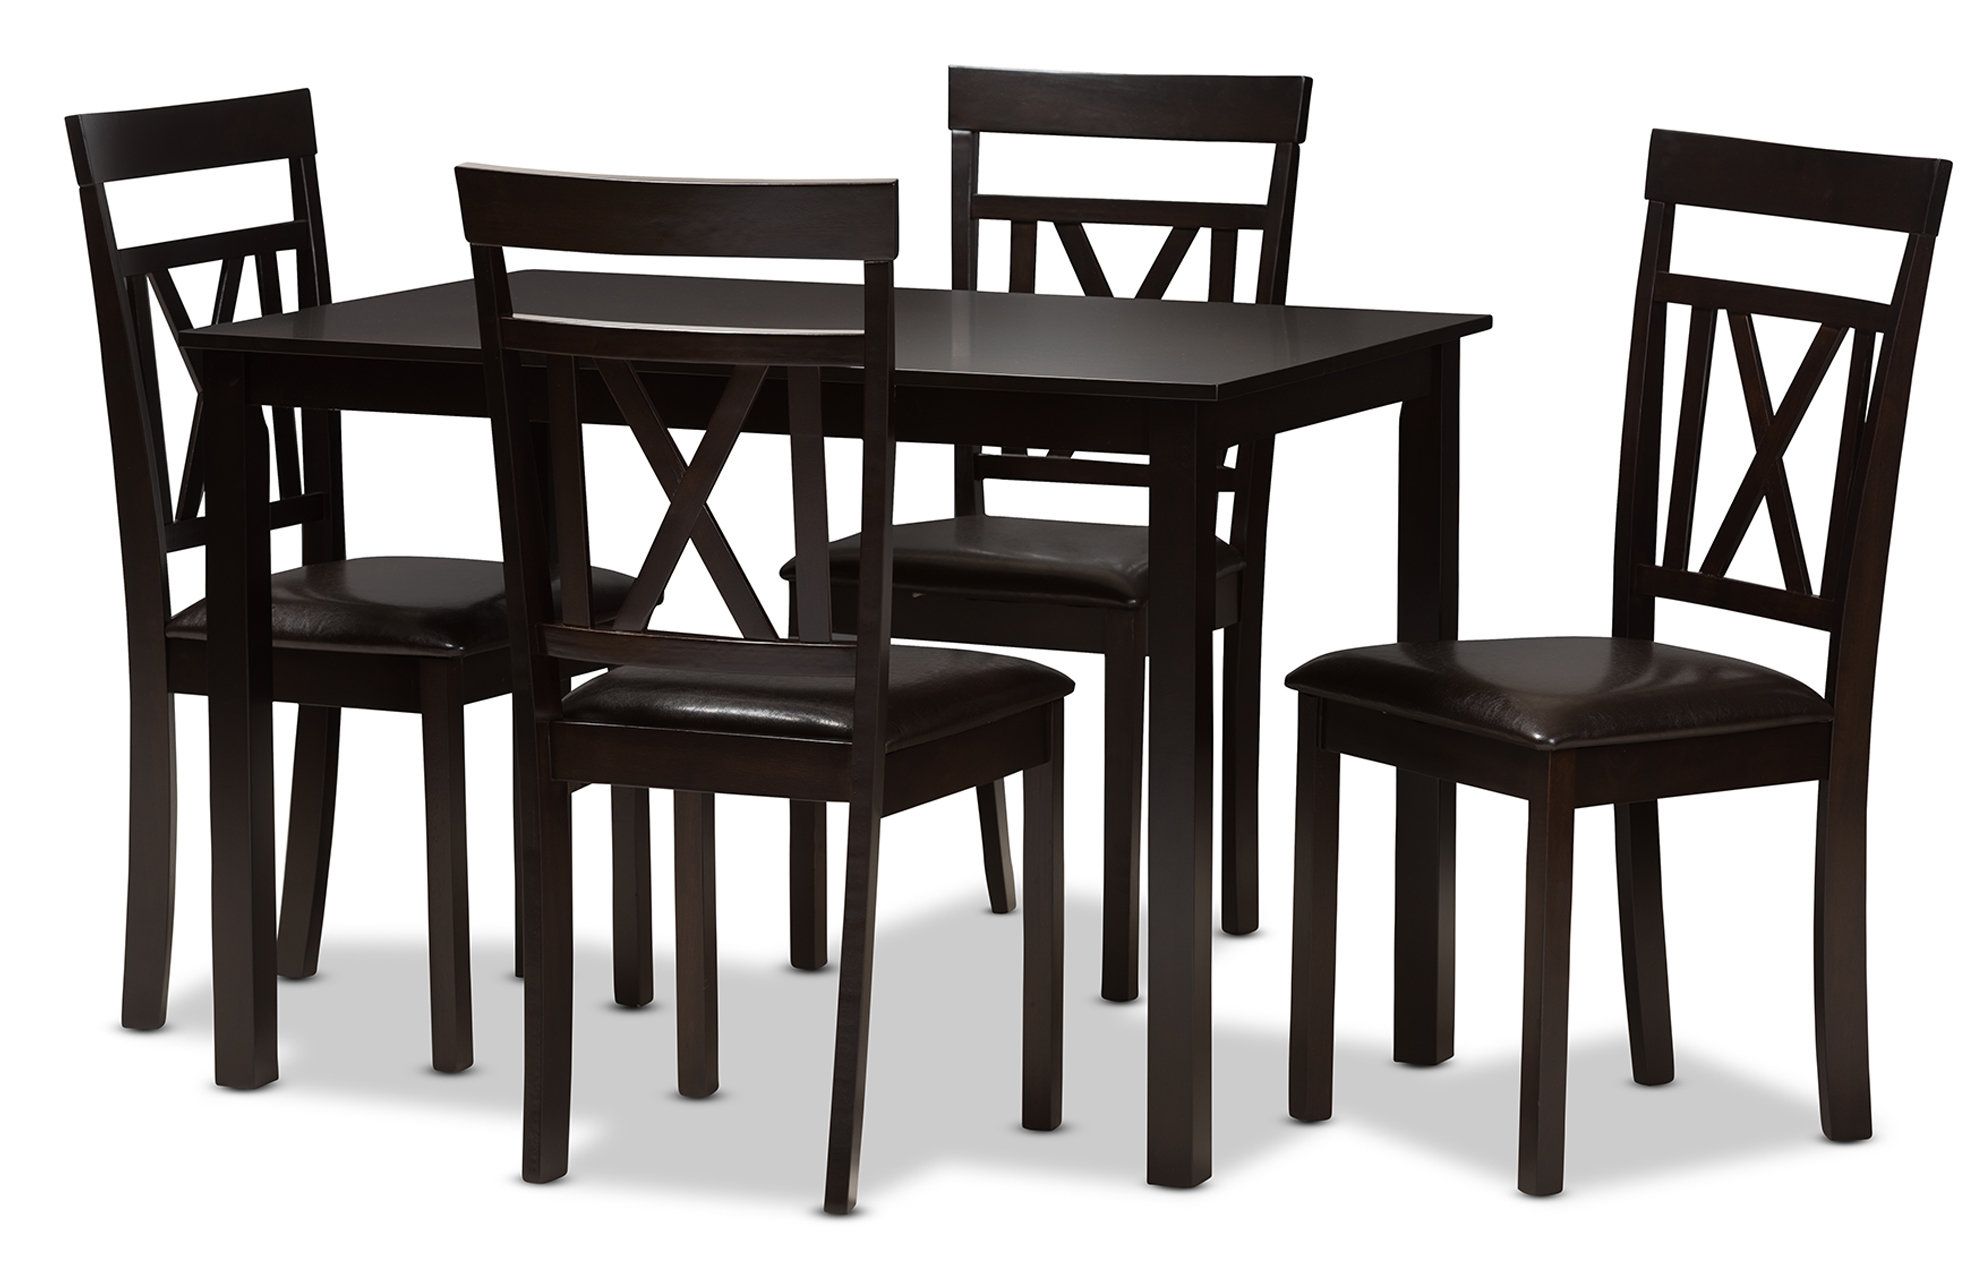 Whitbey Modern And Contemporary 5 Piece Breakfast Nook Dining Set Inside Most Up To Date 5 Piece Breakfast Nook Dining Sets (View 6 of 20)